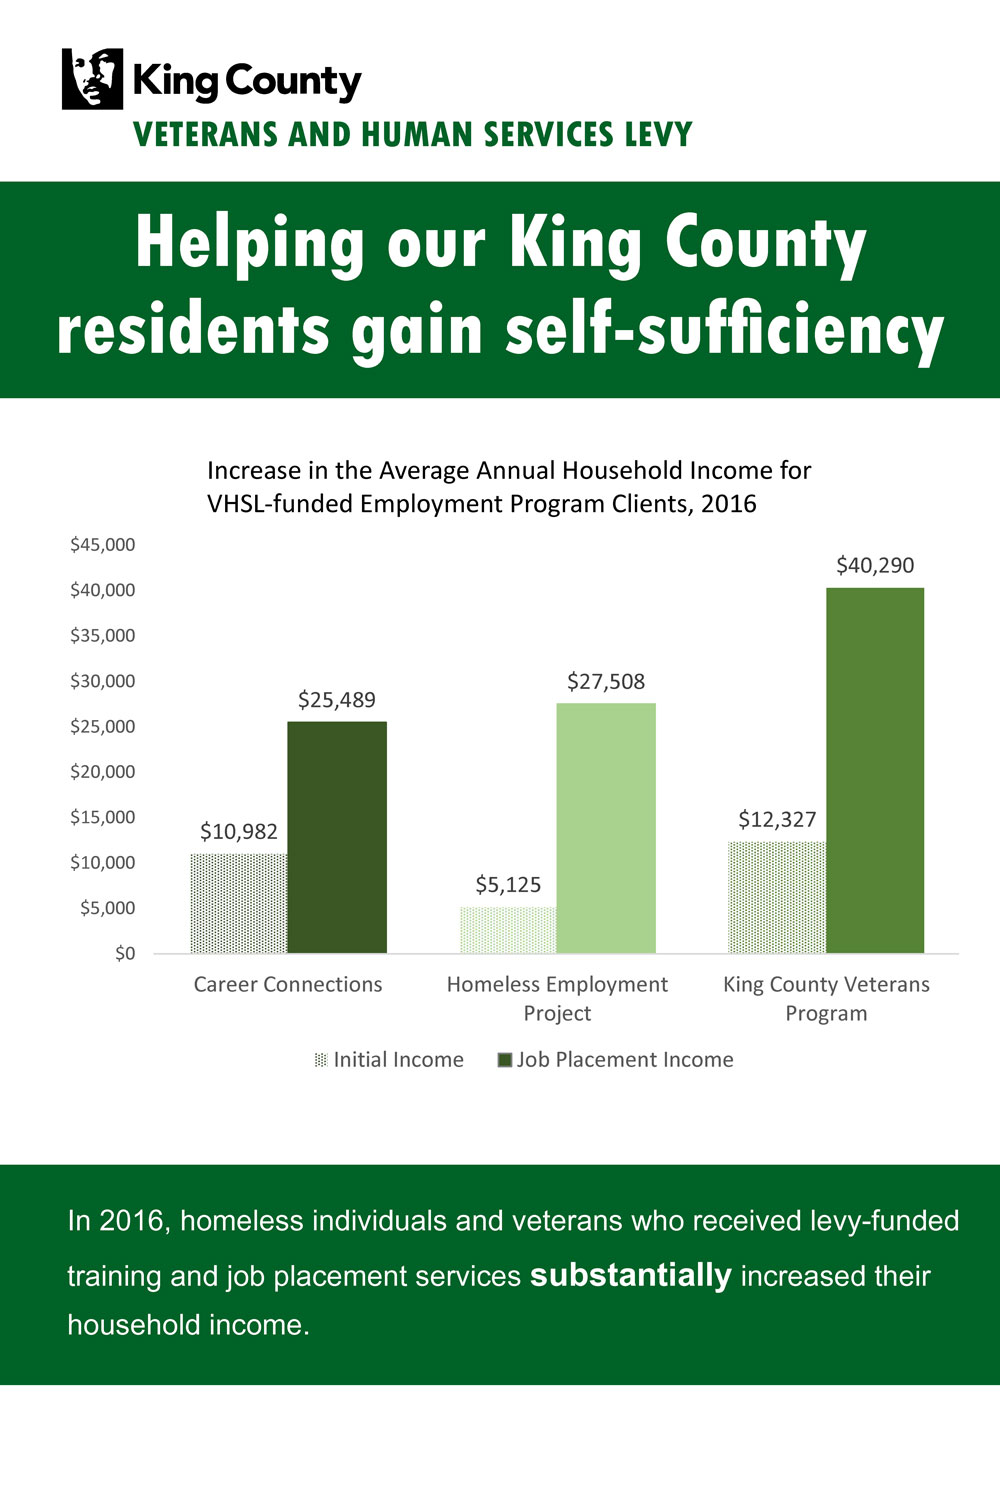 The Veterans and Human Services levy has helped residents gain self sufficiency.